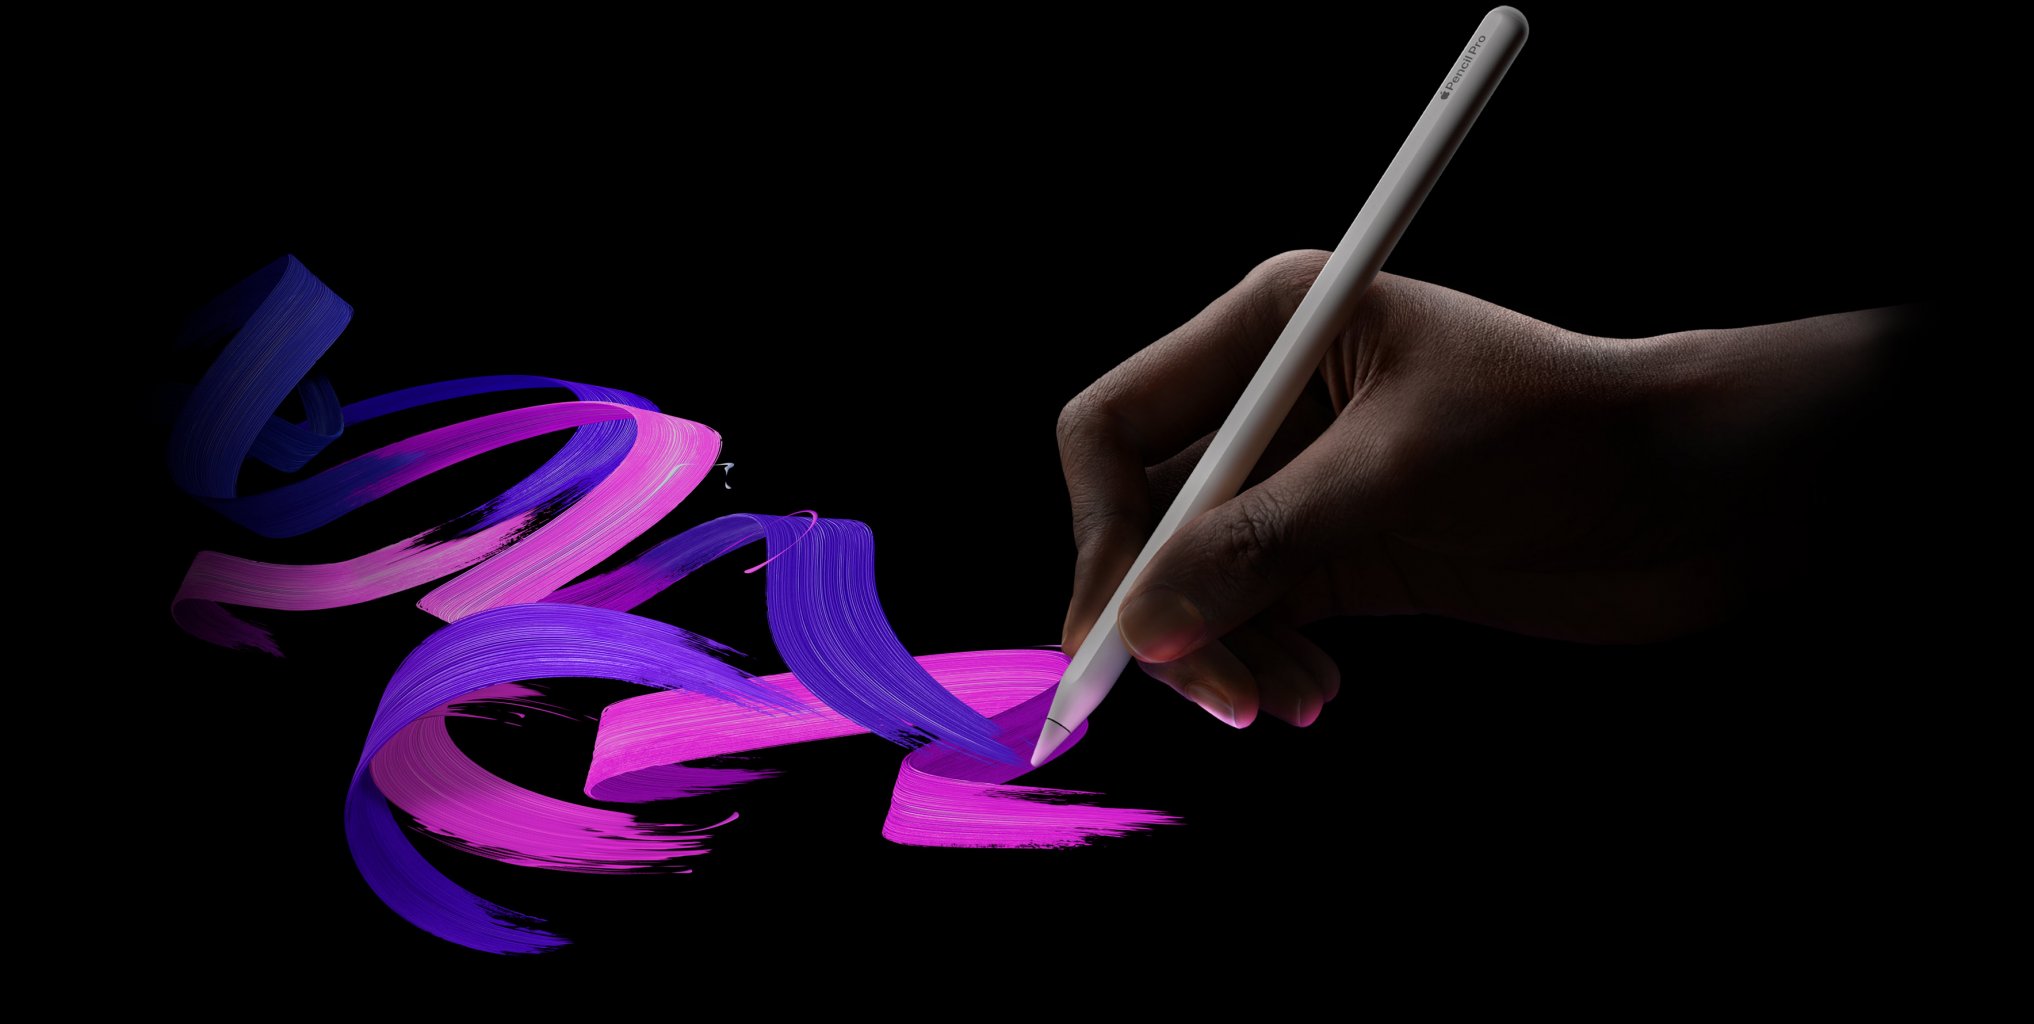 Apple Pencil Pro – Bringing more magical capabilities to the iPad